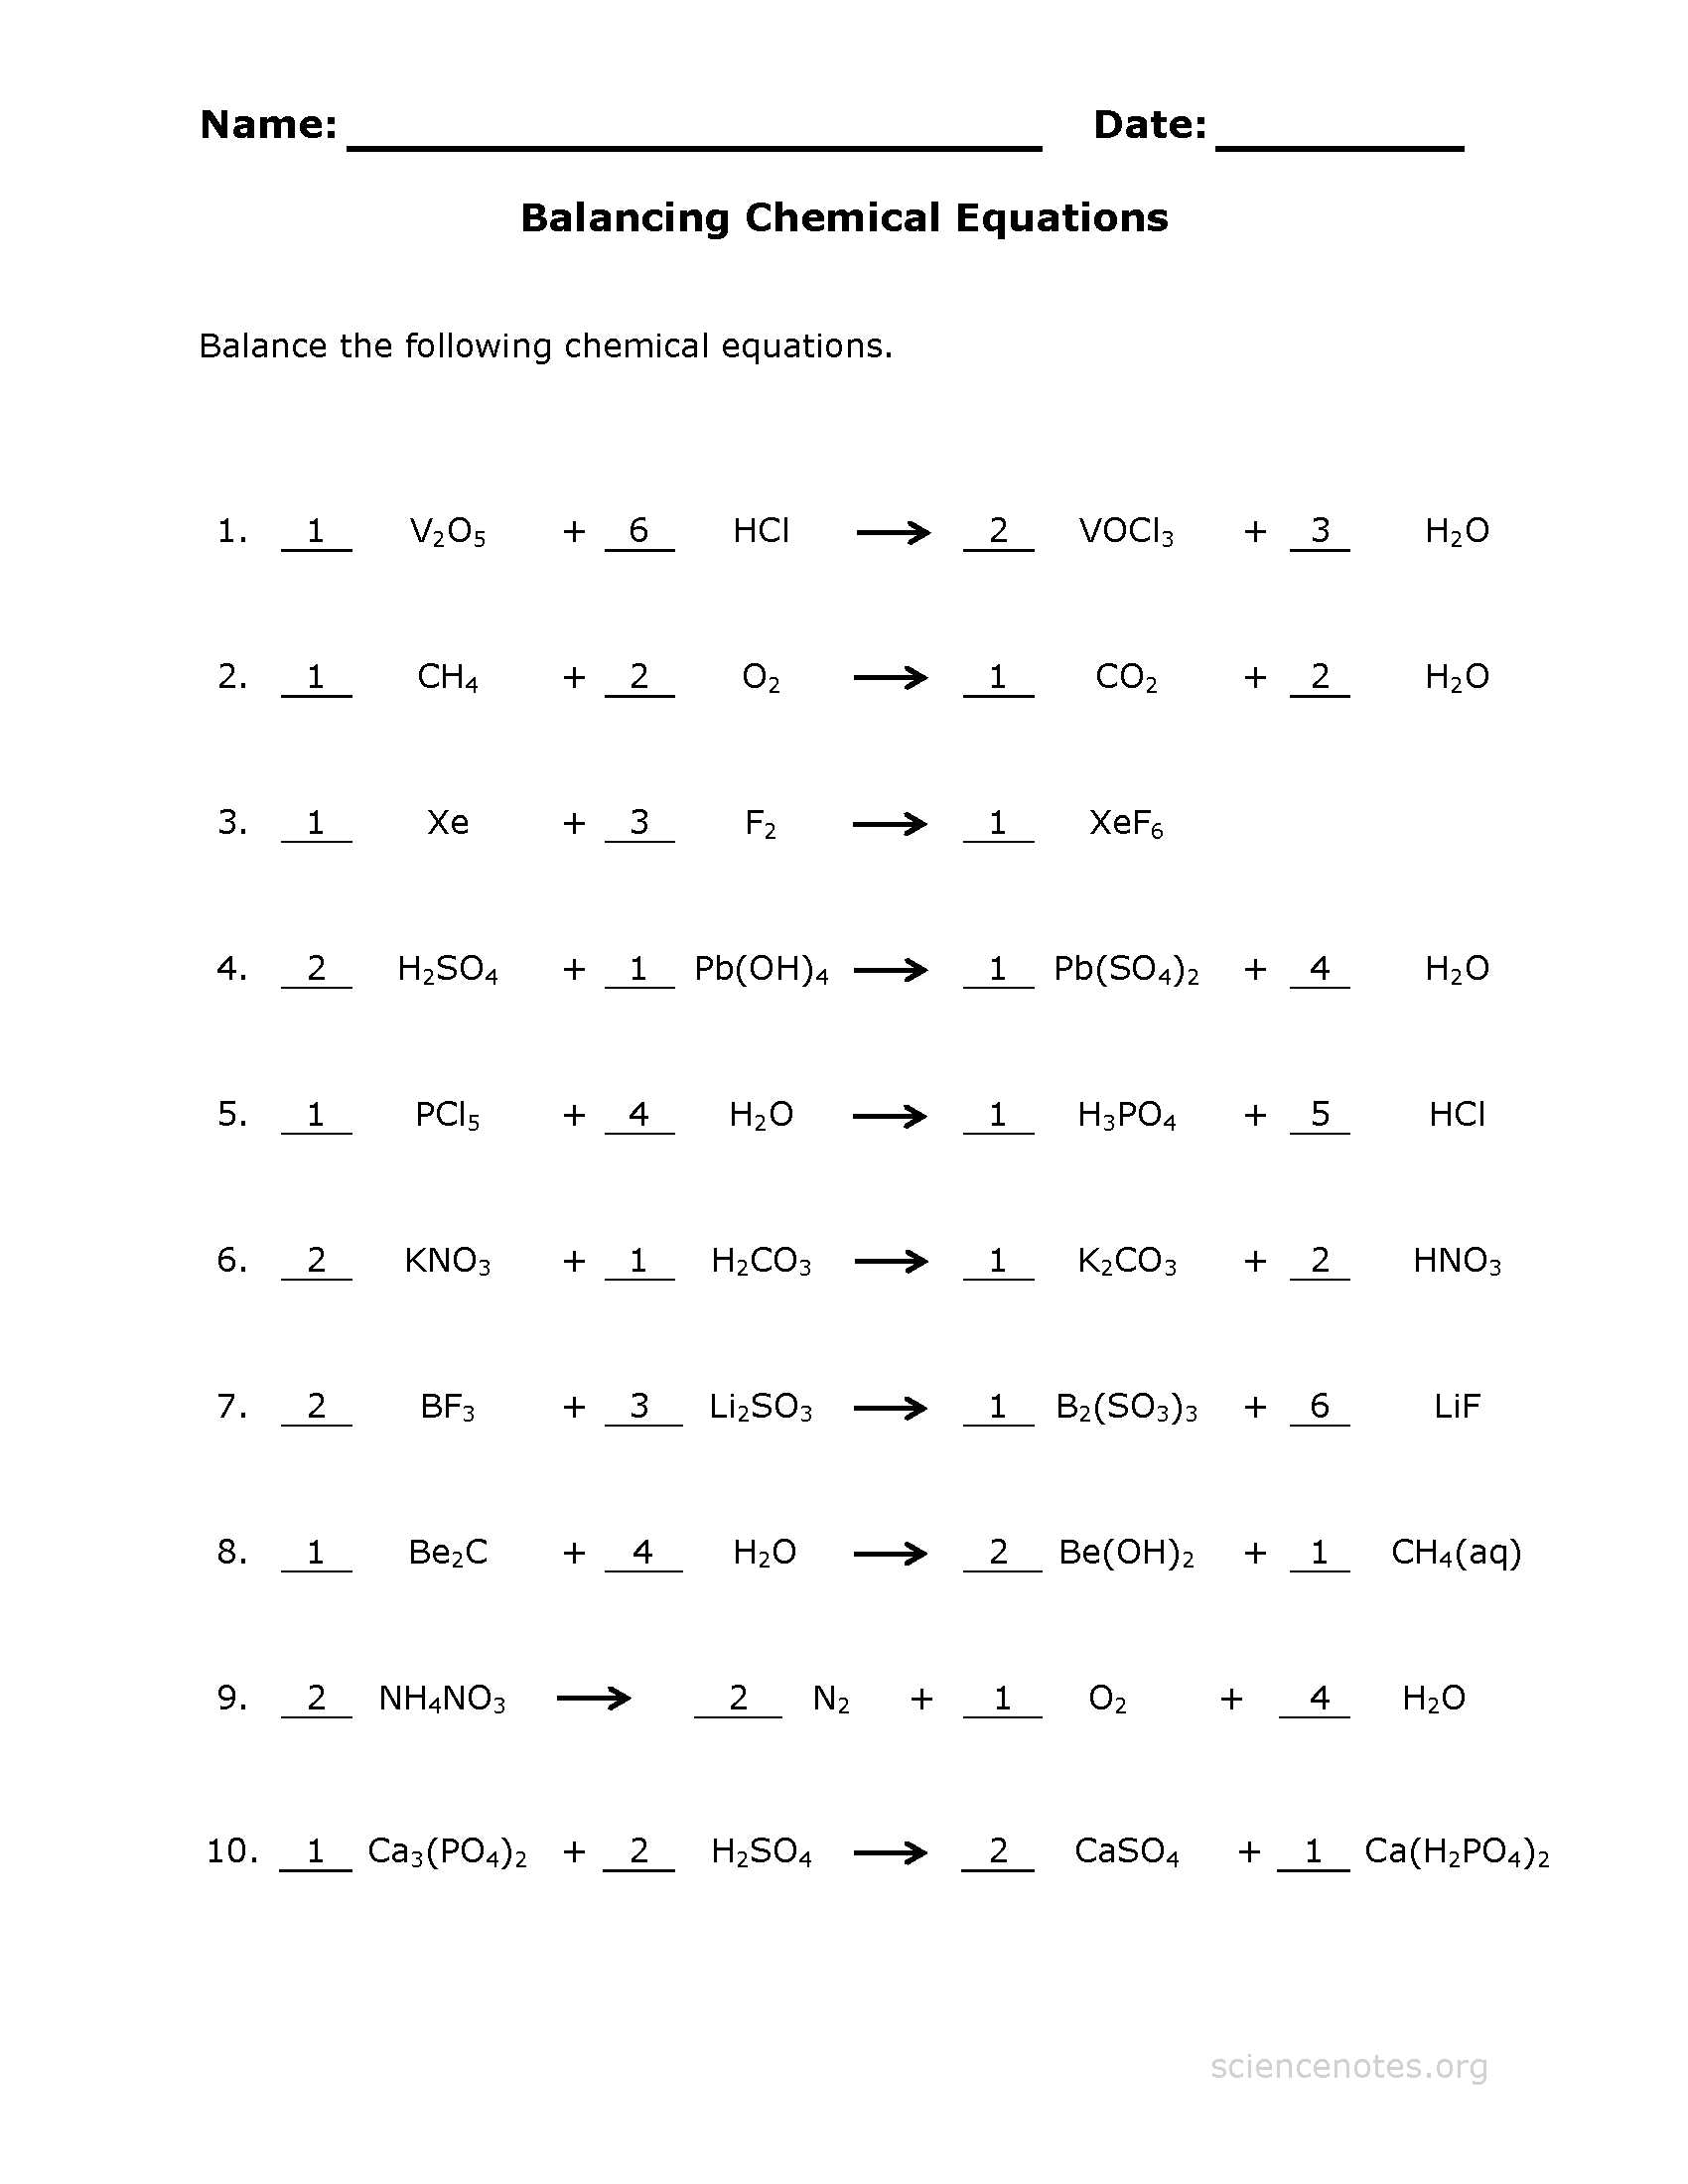 Solving Systems Of Equations Word Problems Worksheet Answer Key as Well as How to Balance Equations Printable Worksheets